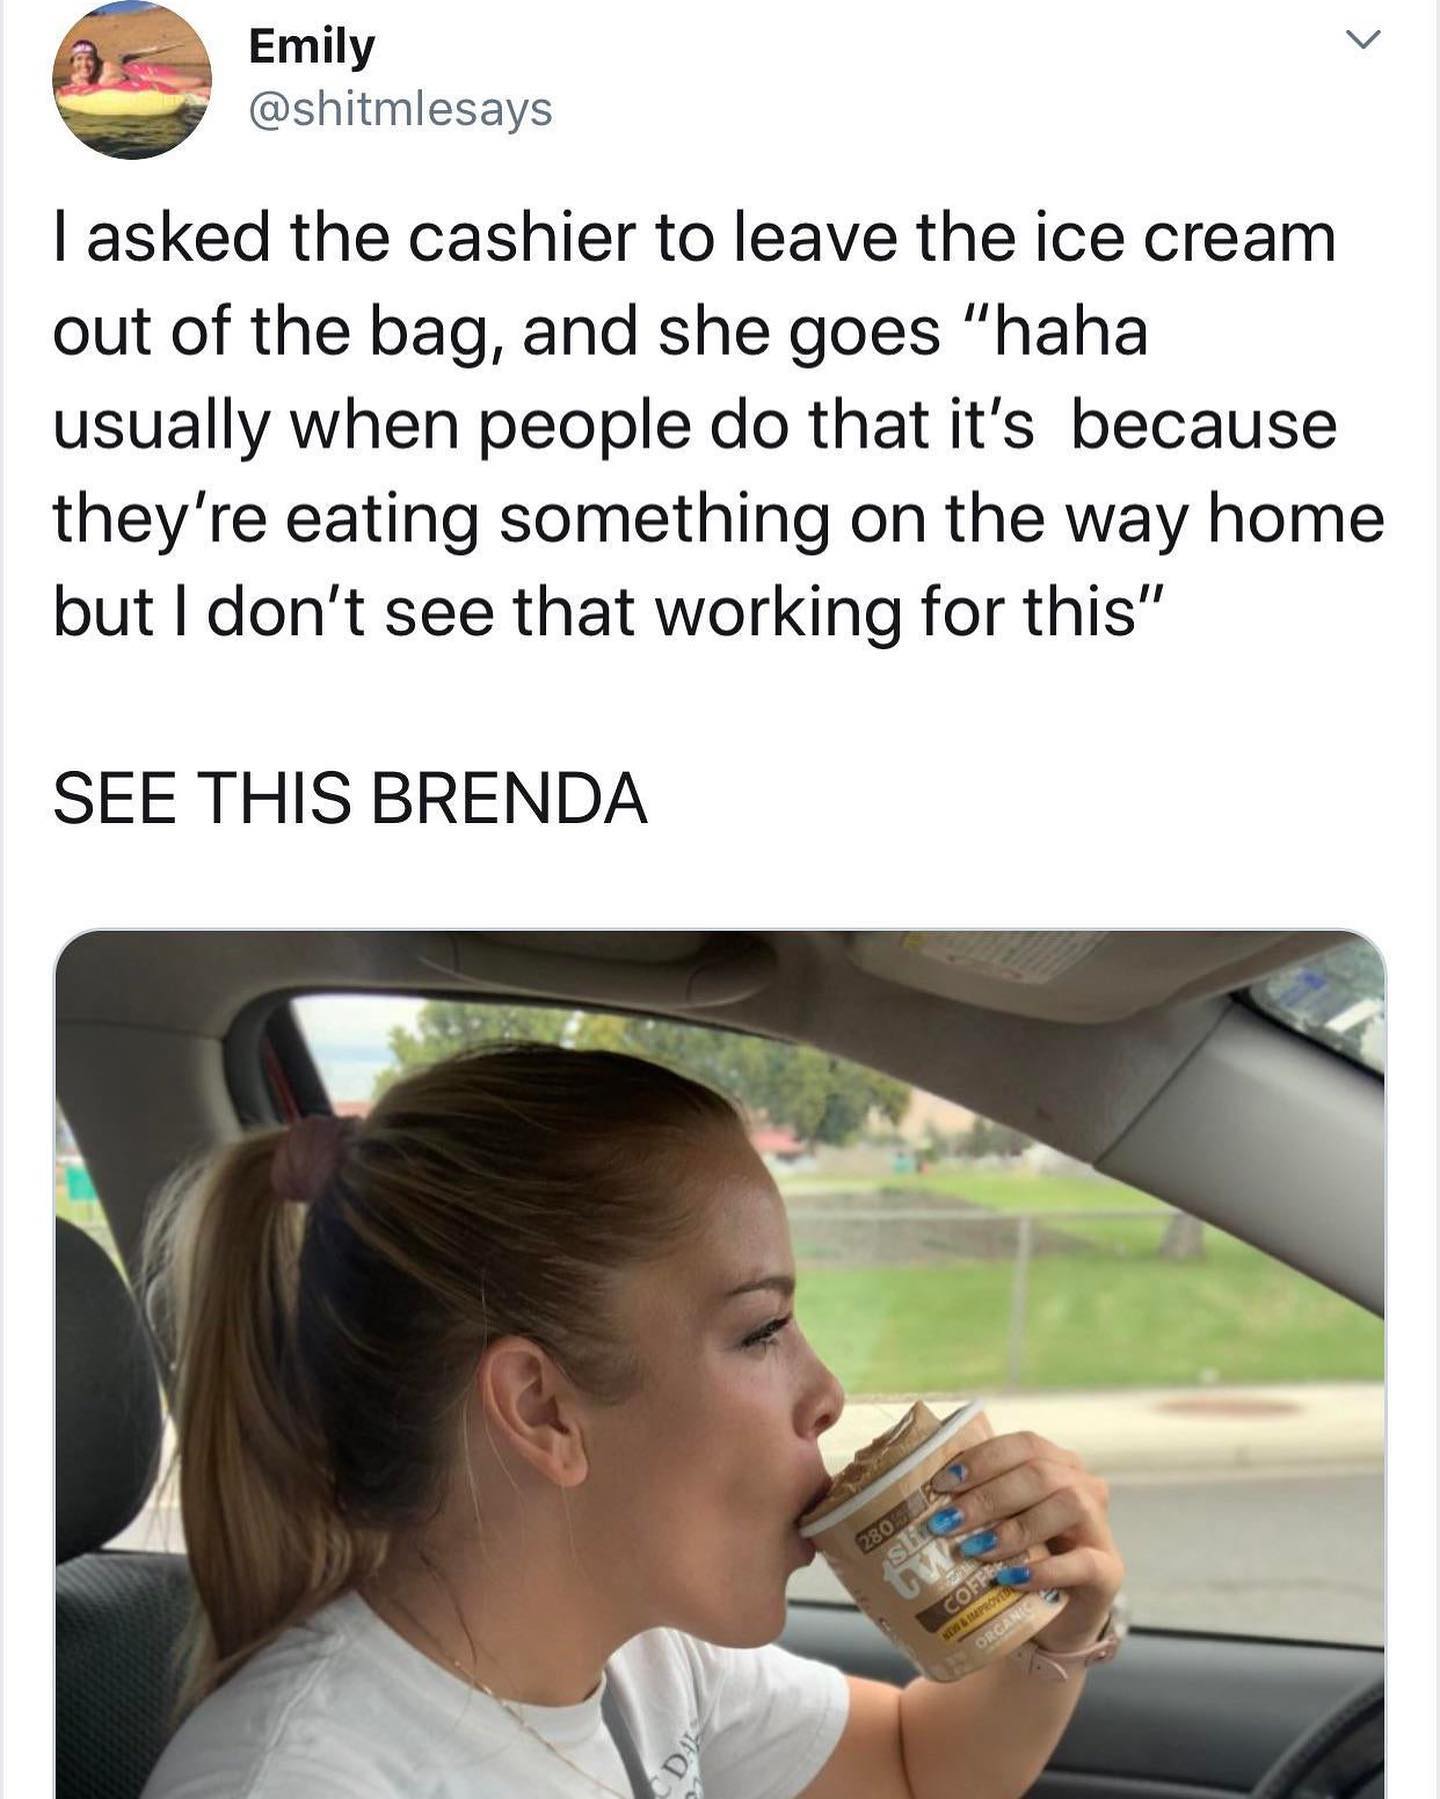 It is probable that Brenda packs a spoon, noob.